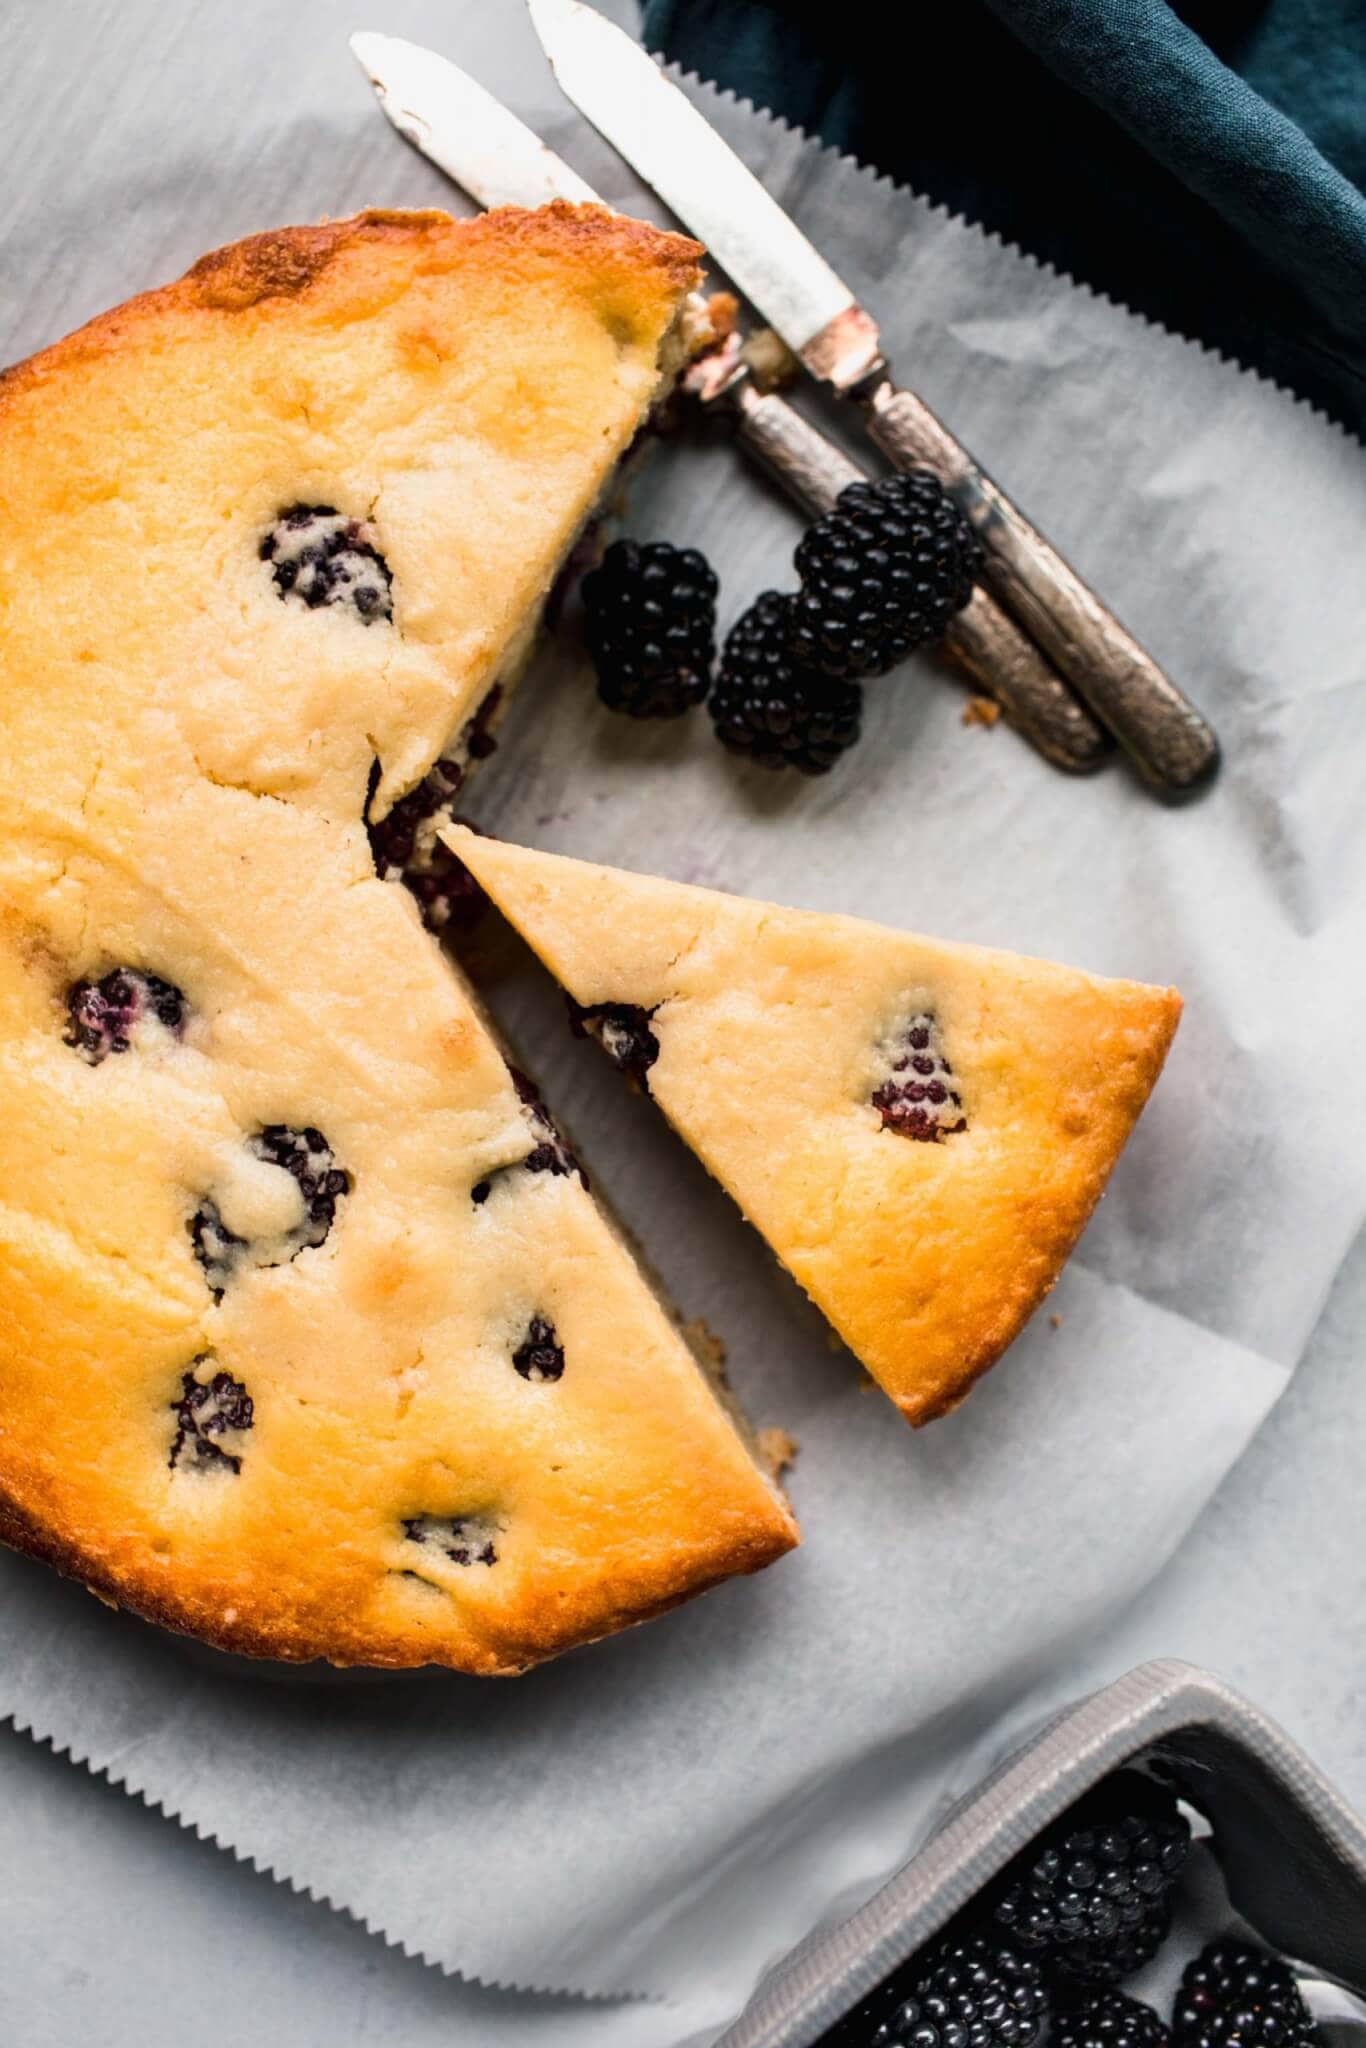 Ricotta cake cut into pieces next to blackberries.